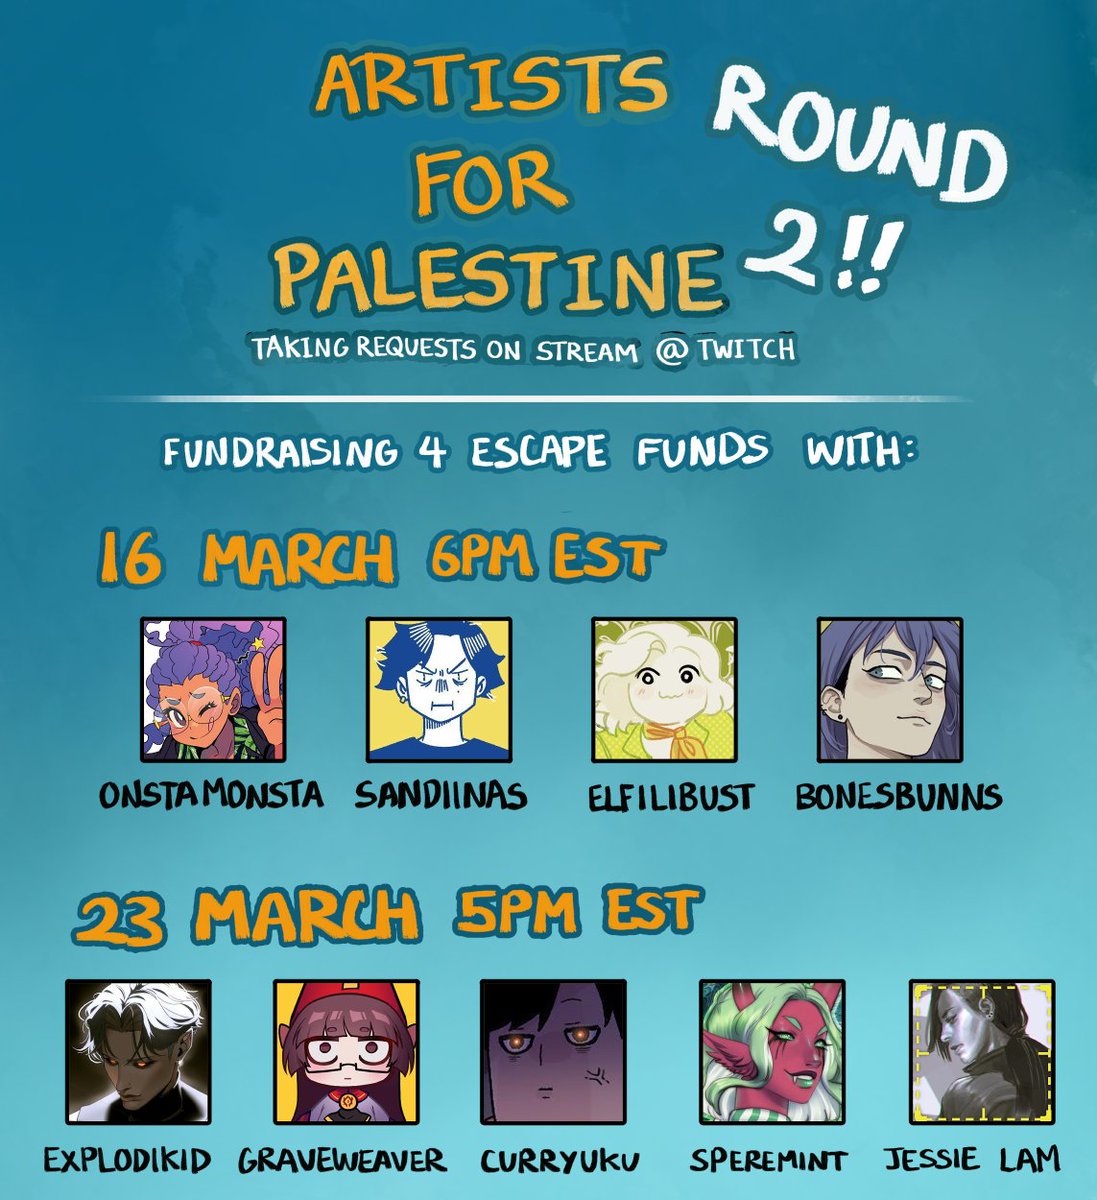 ARTISTS FOR PALESTINE 🇵🇸 - ROUND 2!!! on the 16 and 23 March, I'll once again be taking requests with a bunch of other artists to raise money for Palestinian escape funds! The roster this time includes artists like @explodikid_ , @grave_weaver, @axl99 and @OnstaMonsta!!